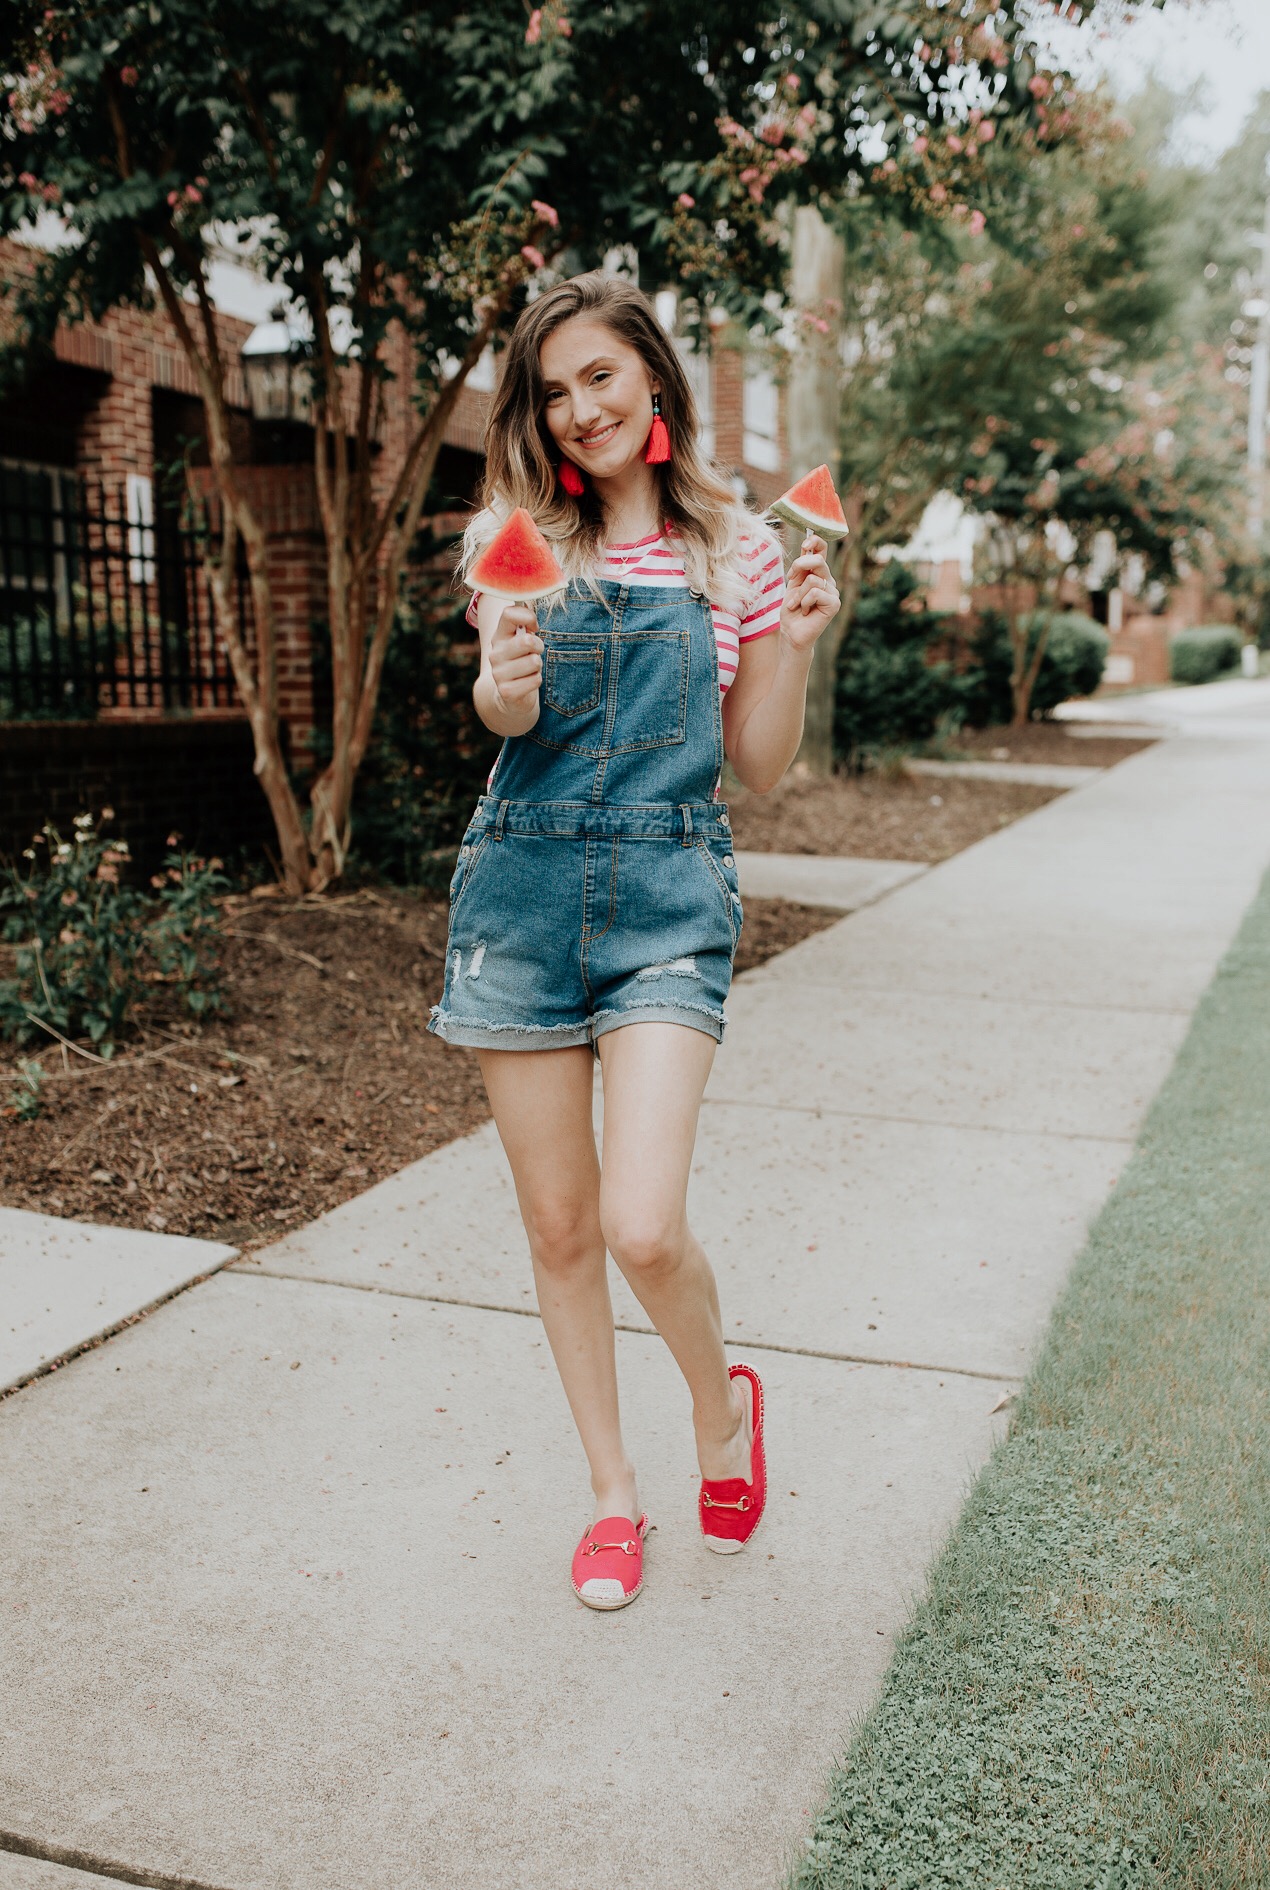 Inexpensive affordable online clothing brands by North Carolin fashion and lifestyle blogger Jessica Linn.